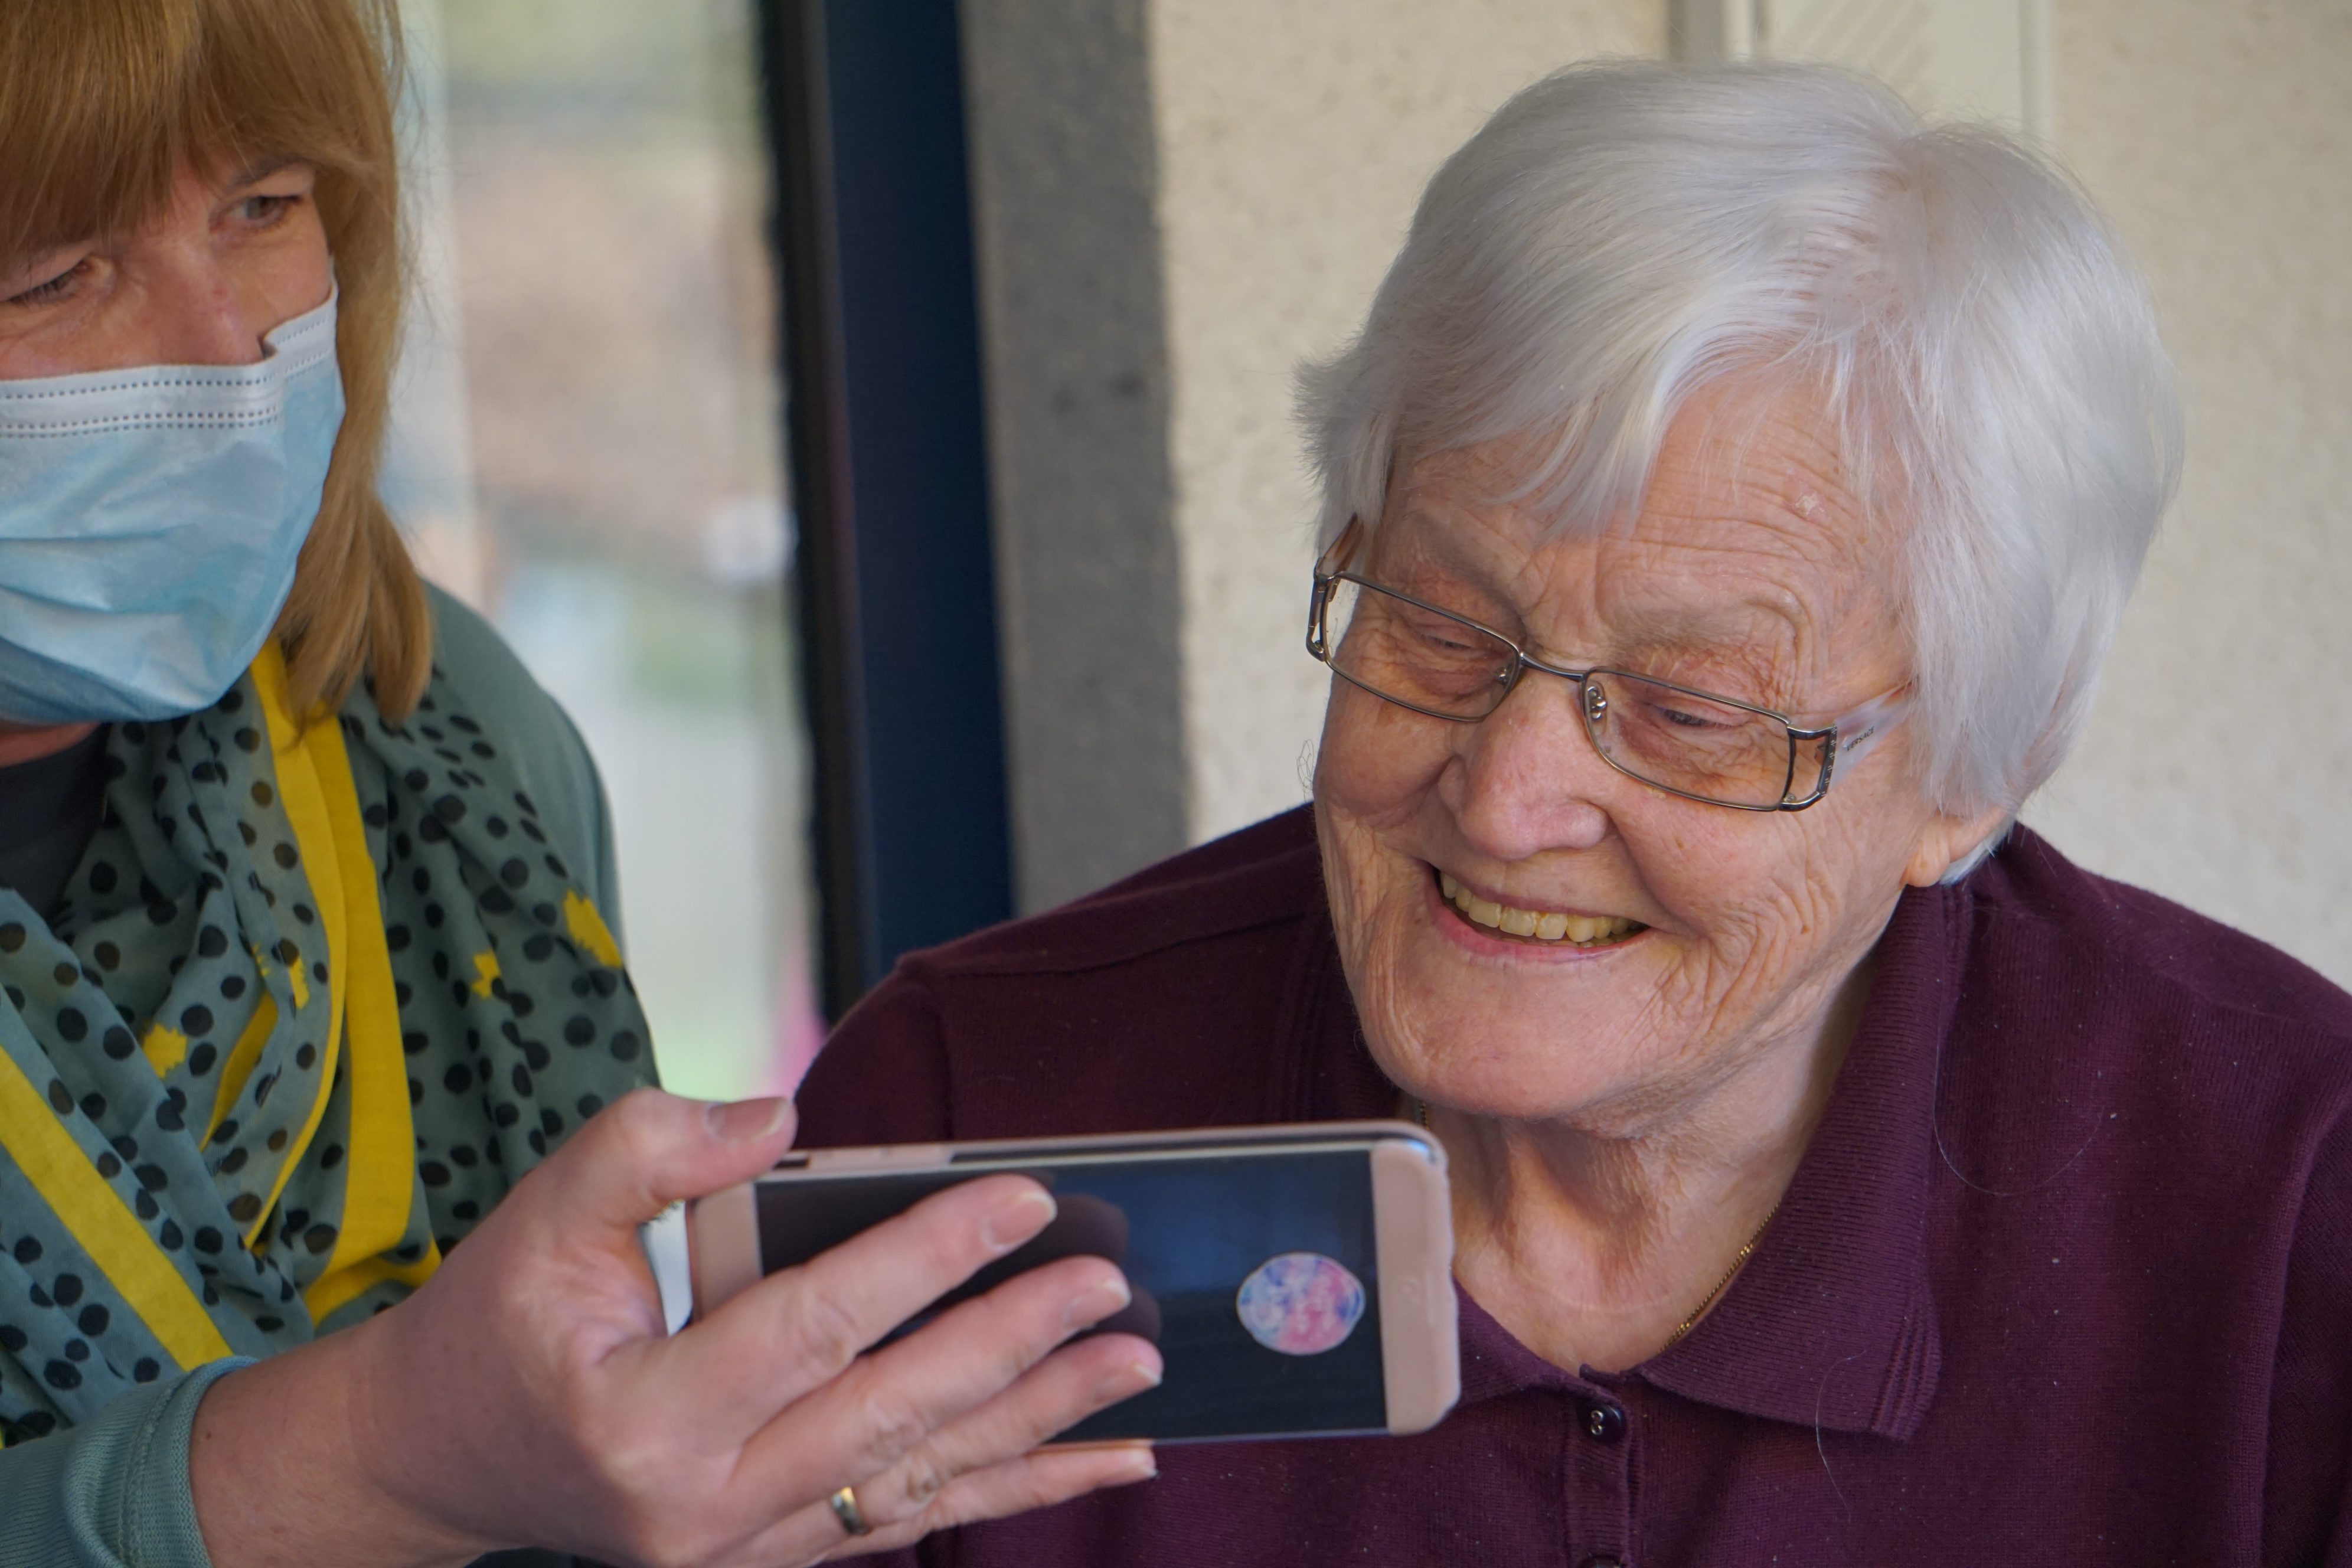 Narrative Medicine Care image showing a care Supporter holding a smartphone up for an elderly woman to see as they talk.